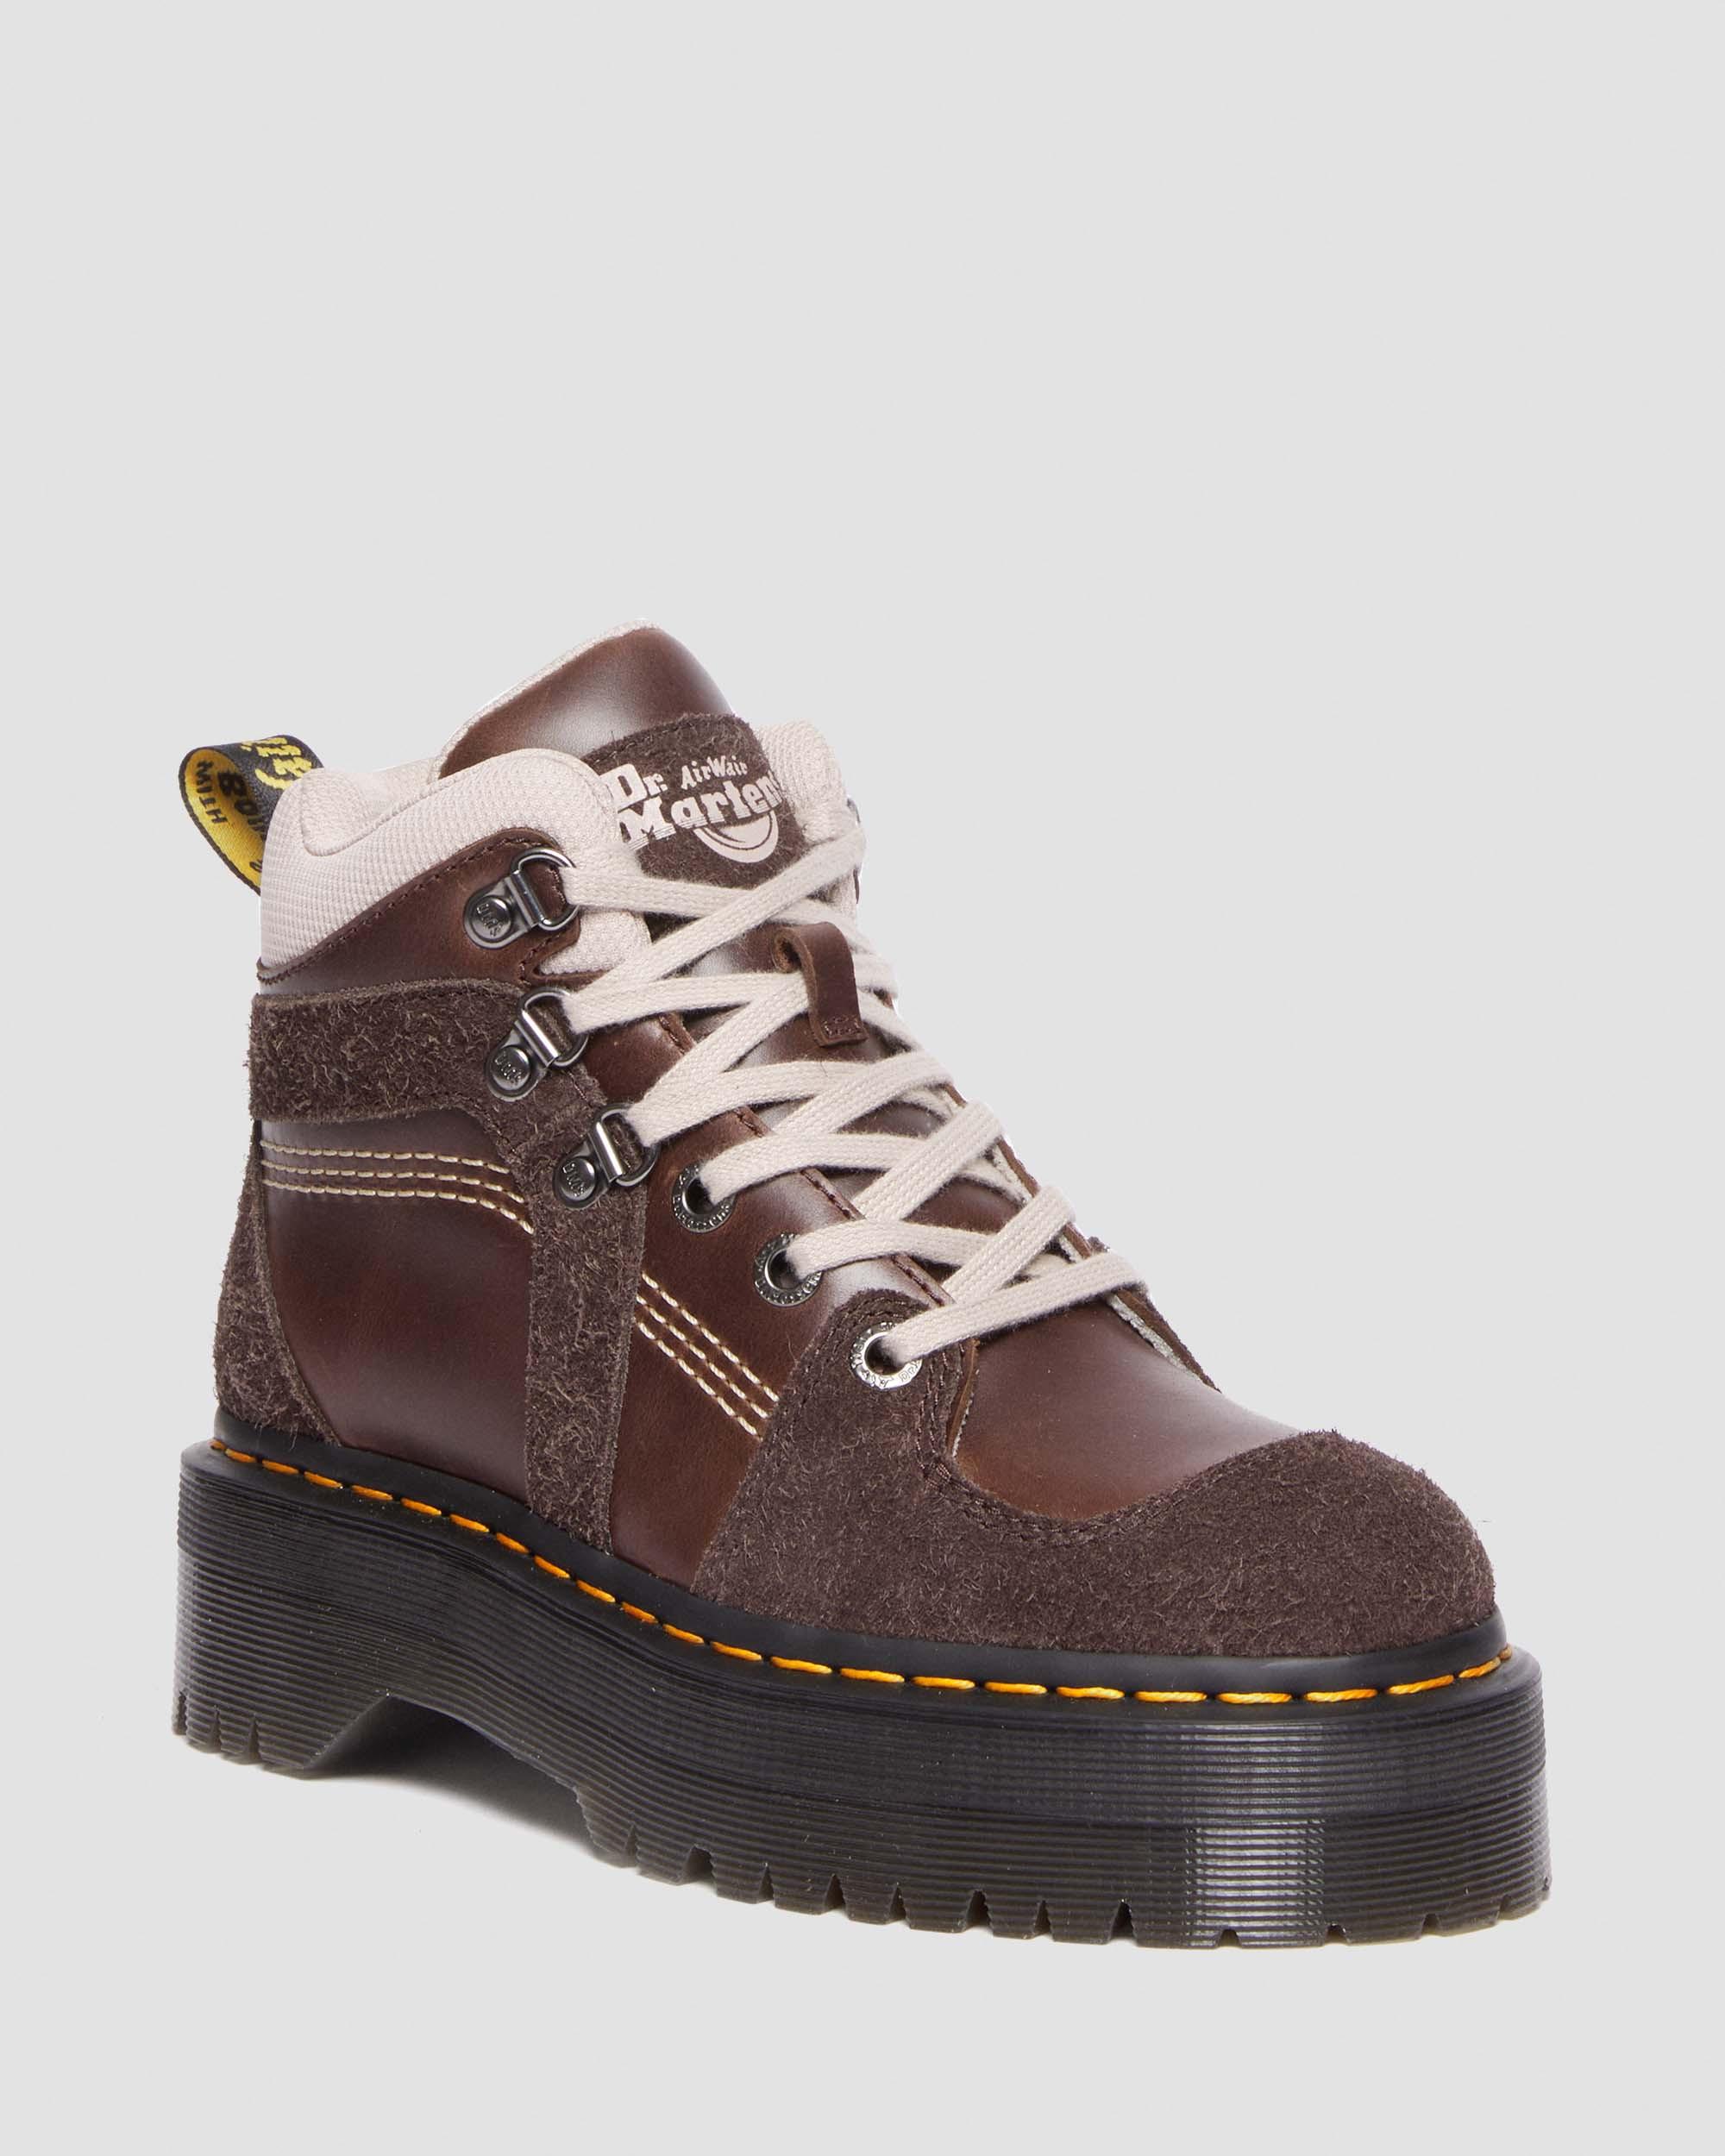 Zuma Leather & Suede Hiker Style Boots in DARK BROWN